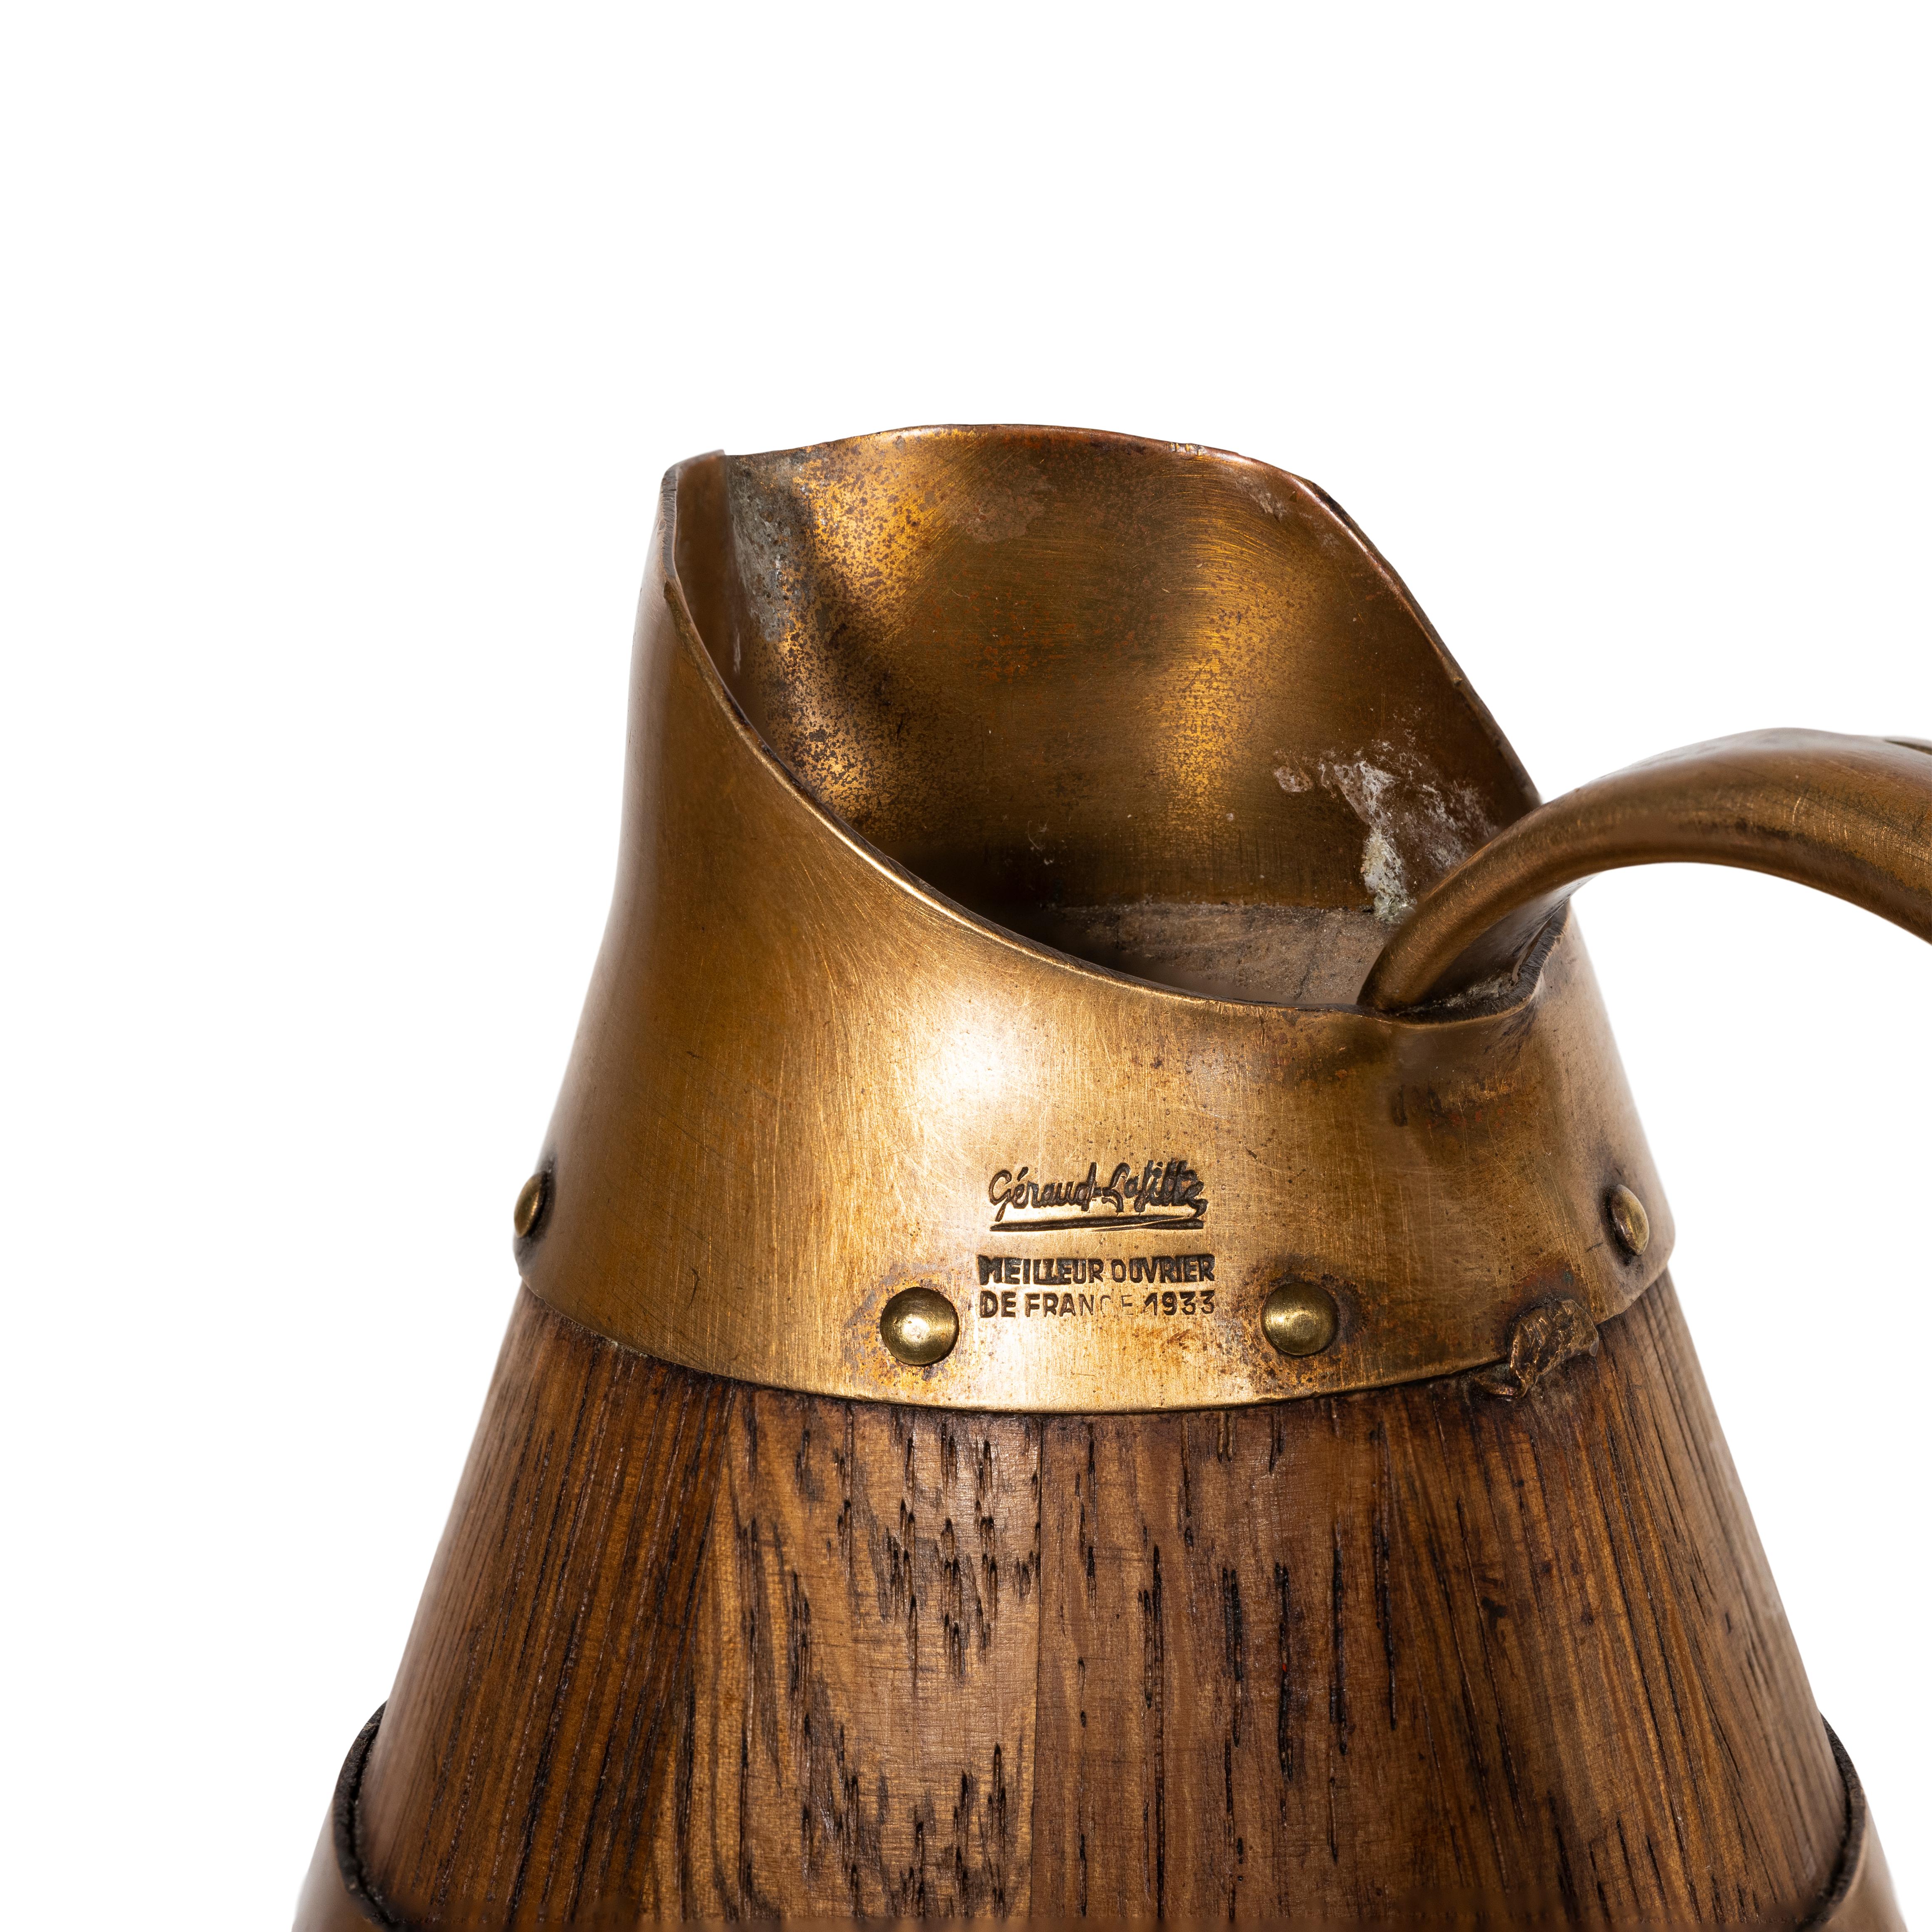 French alascian wine pitcher. Oak with hammered nickel banding. A great barware piece!

Period: Early 20th Century
Origin: France
Size: 8